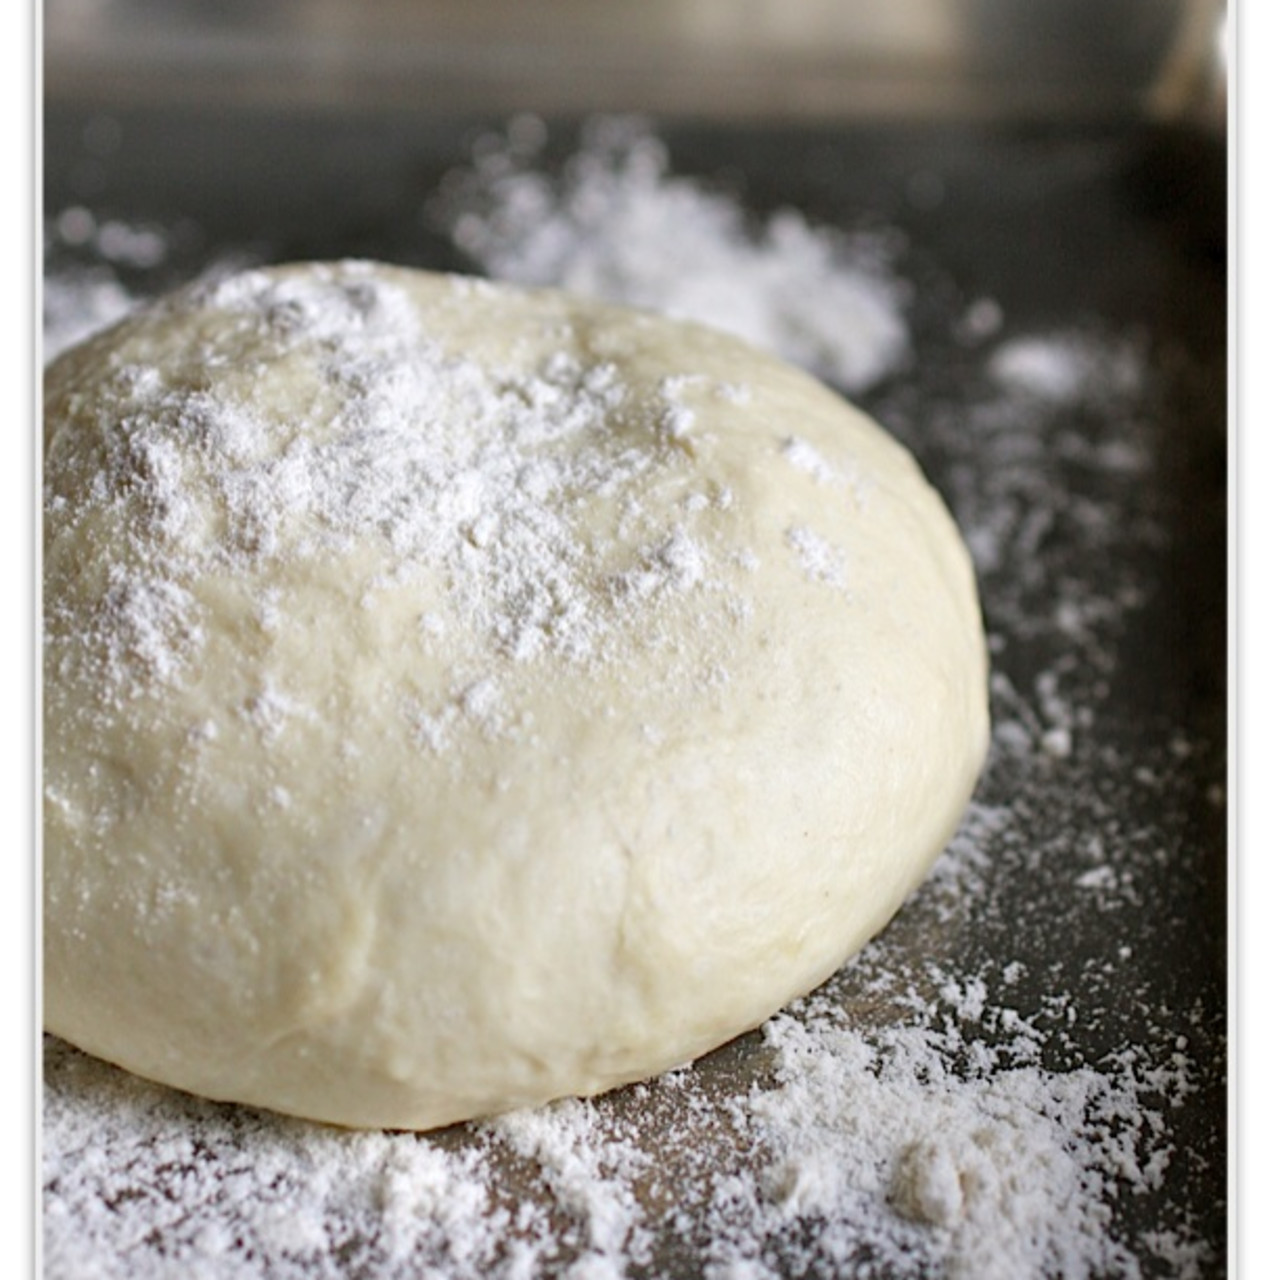 https://bigoven-res.cloudinary.com/image/upload/t_recipe-1280/pizza-dough-thin-crust-from-fo-142846.jpg